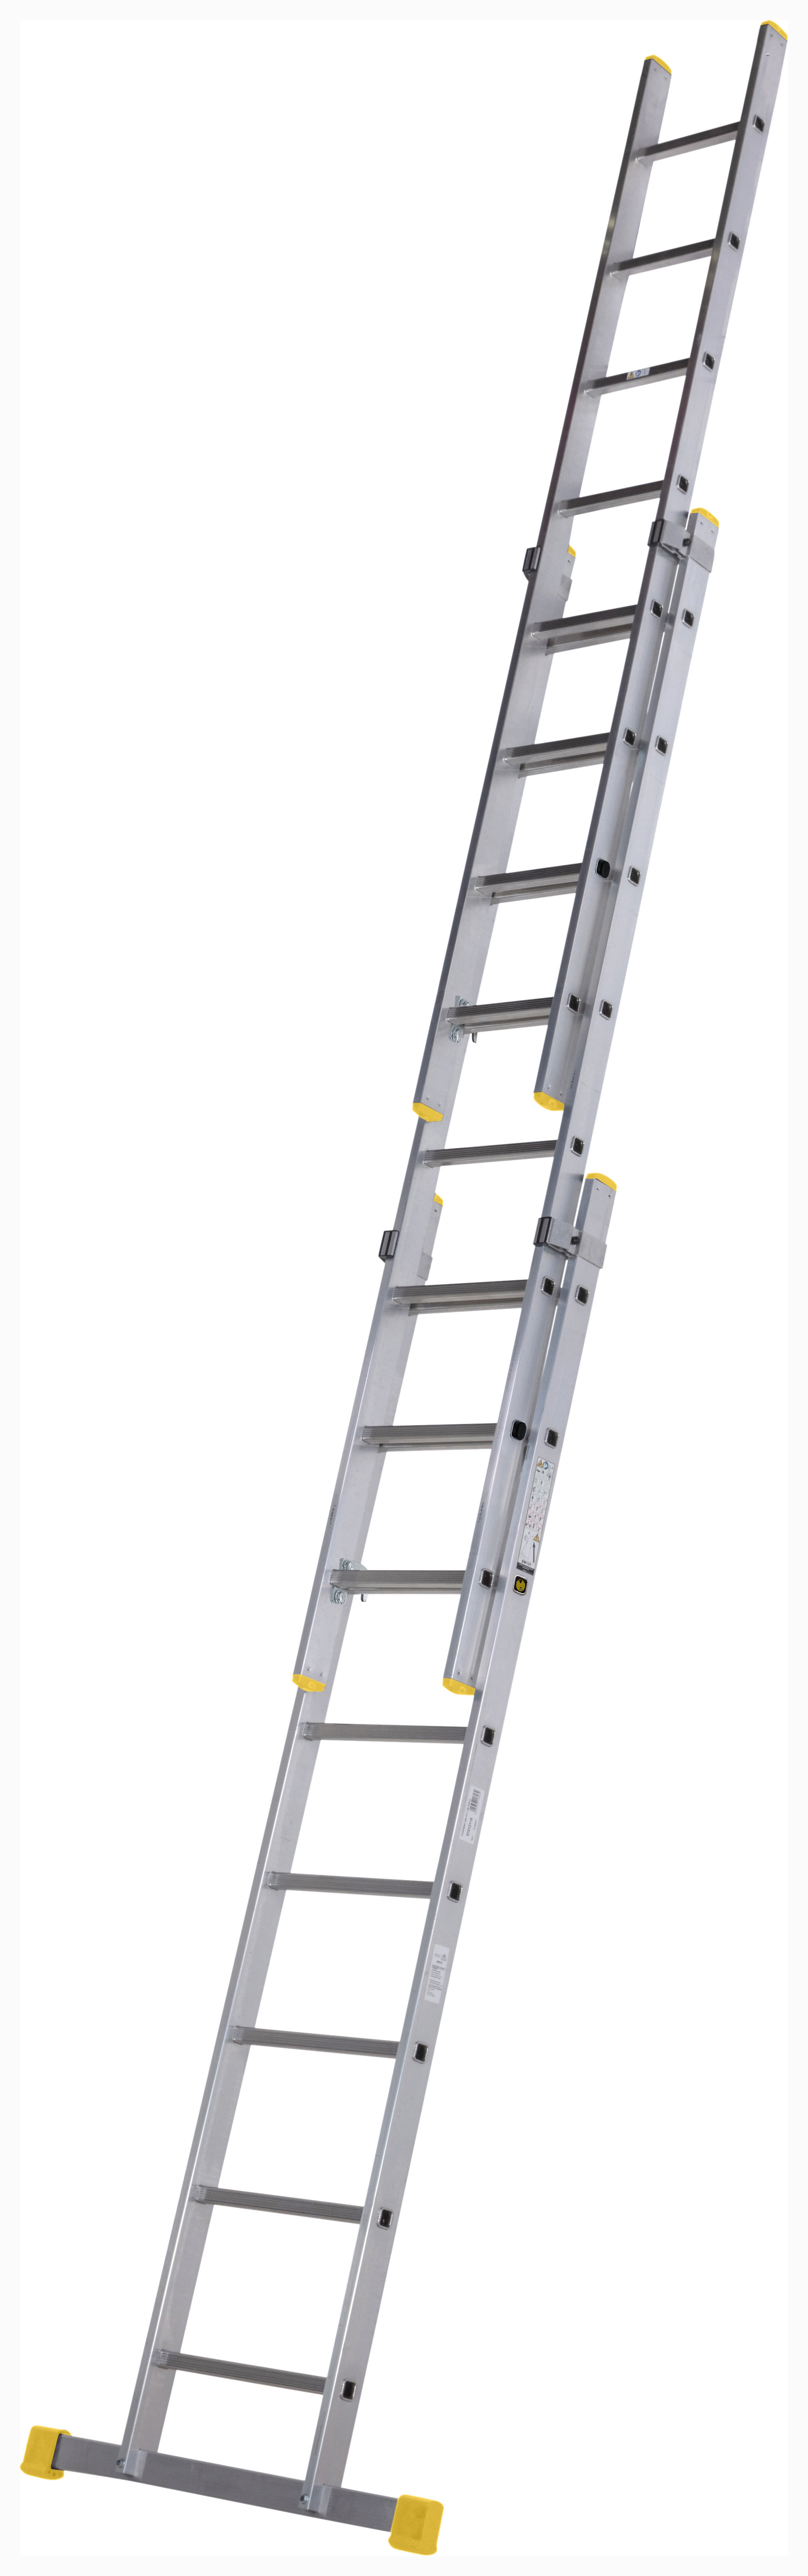 Werner Professional 3 Section Aluminium Extension Ladder -